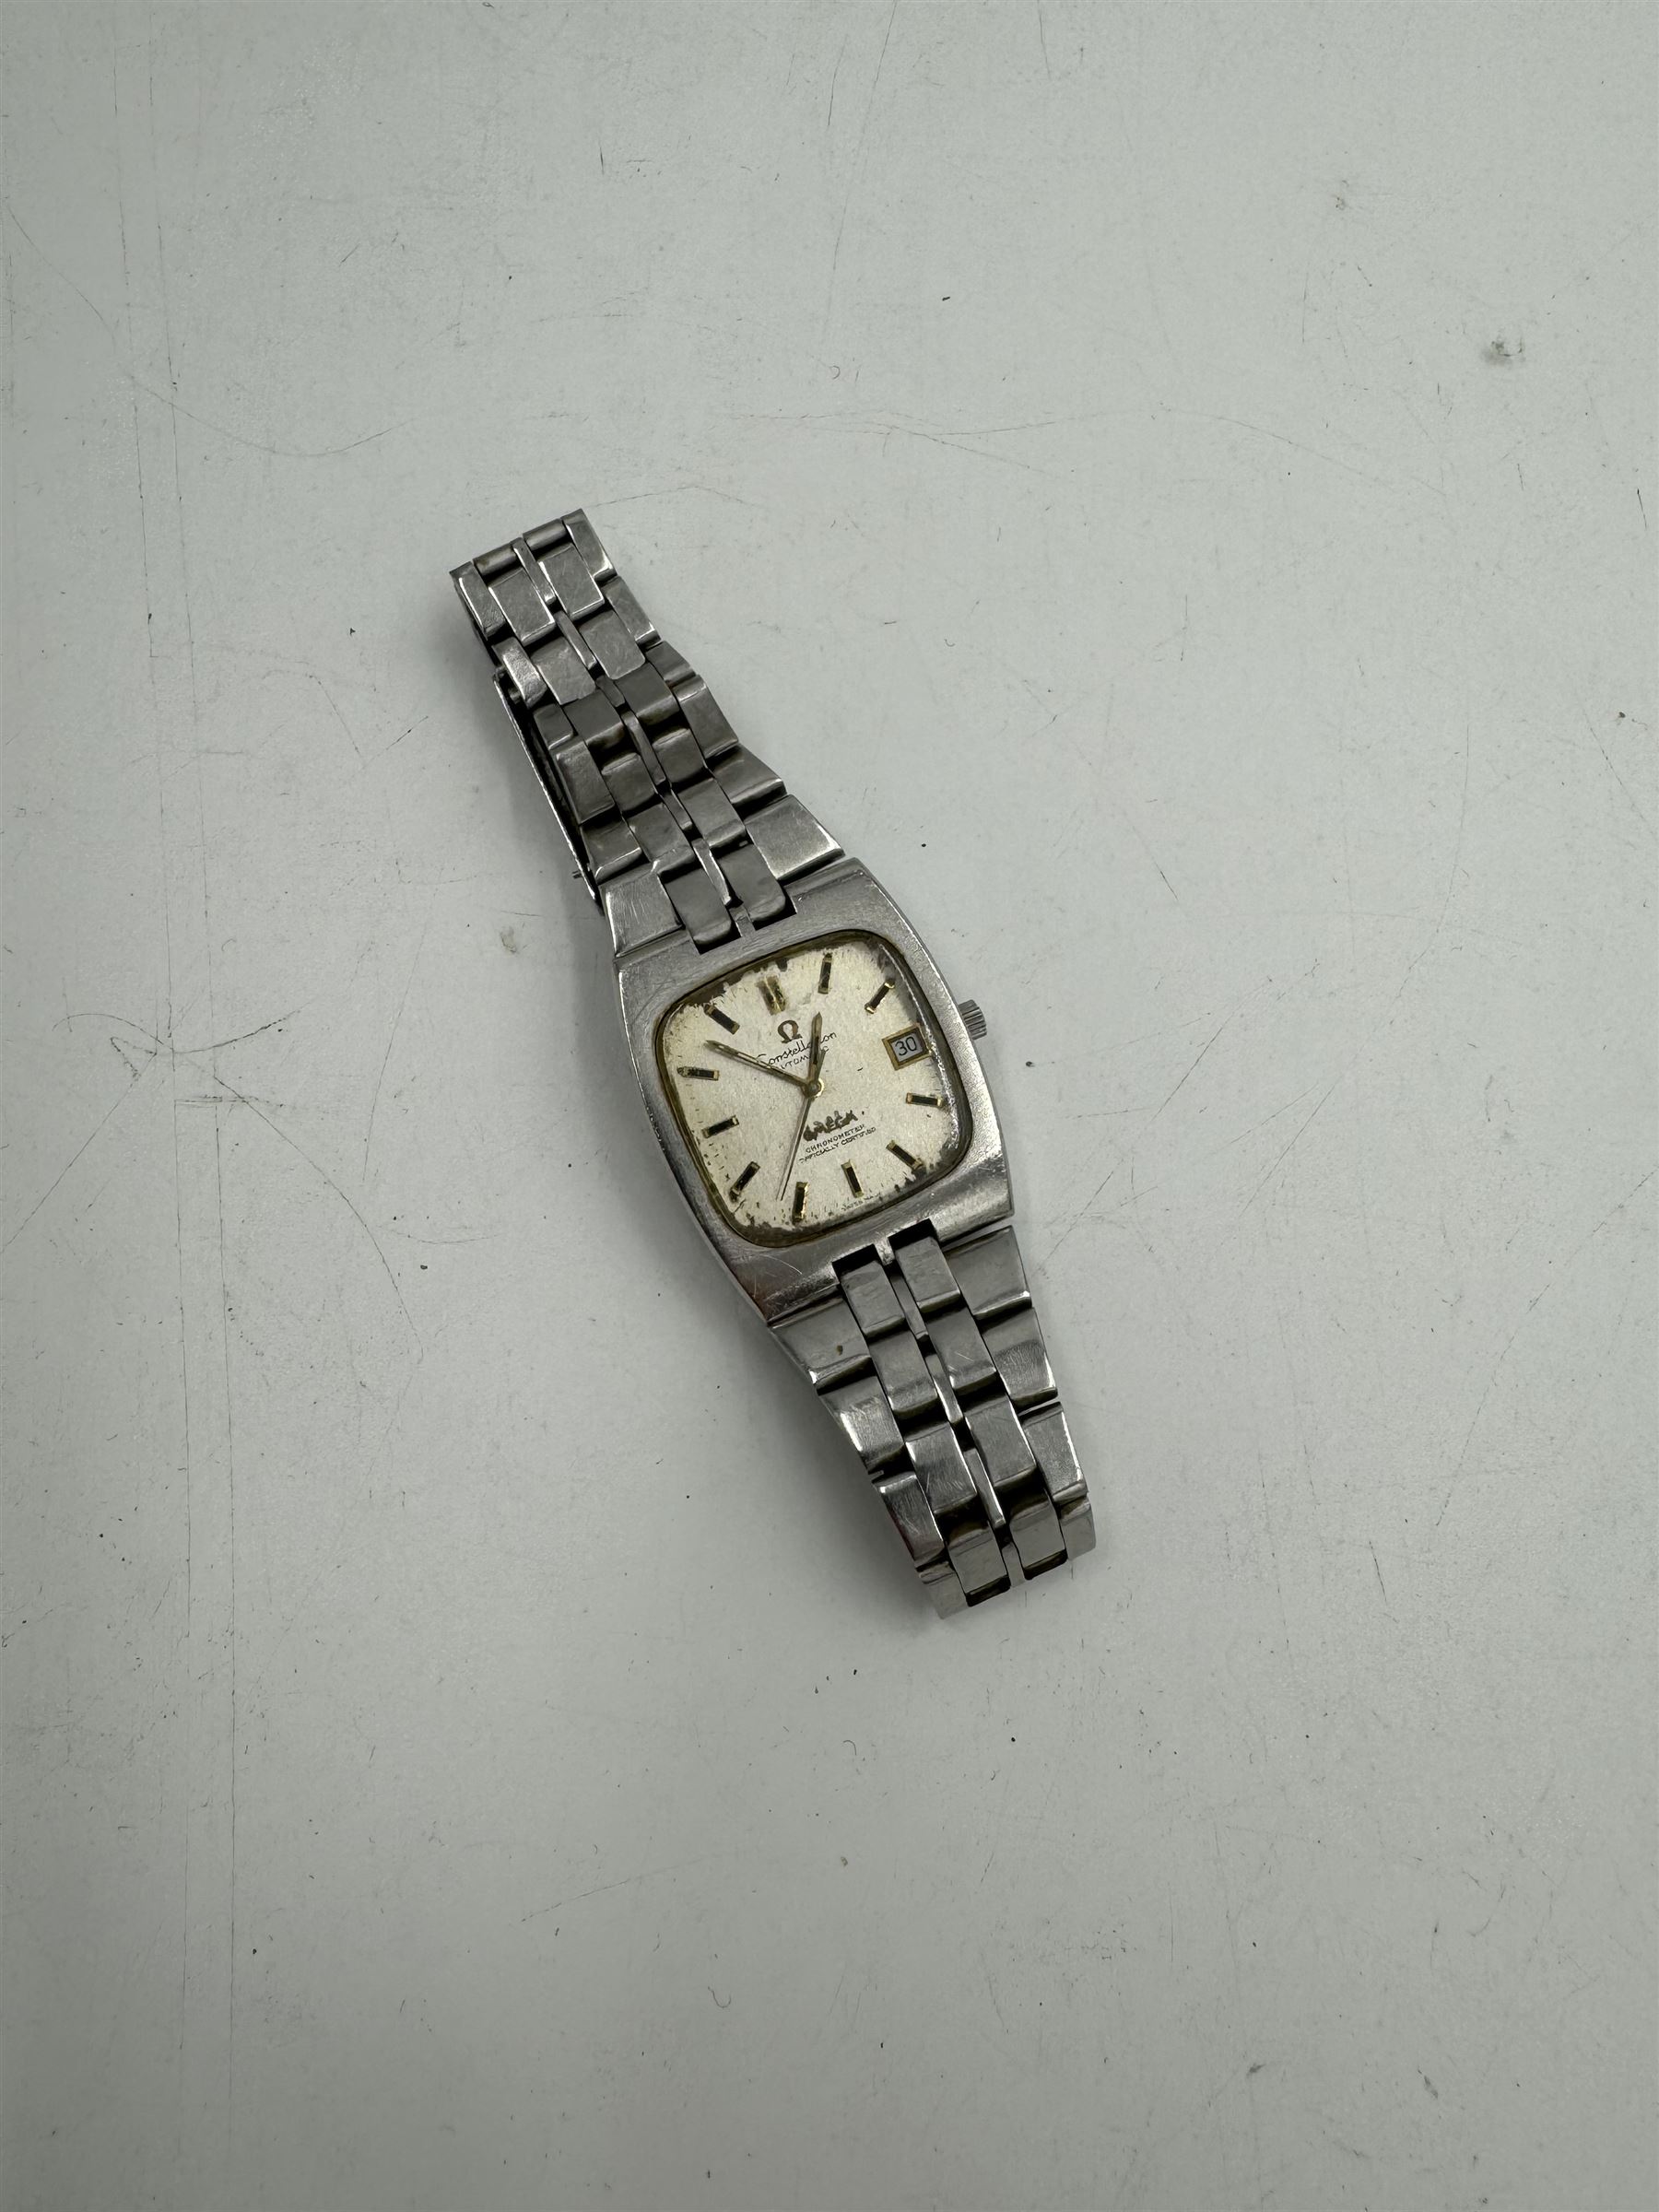 Omega gentleman's stainless steel manual wind wristwatch - Image 2 of 3